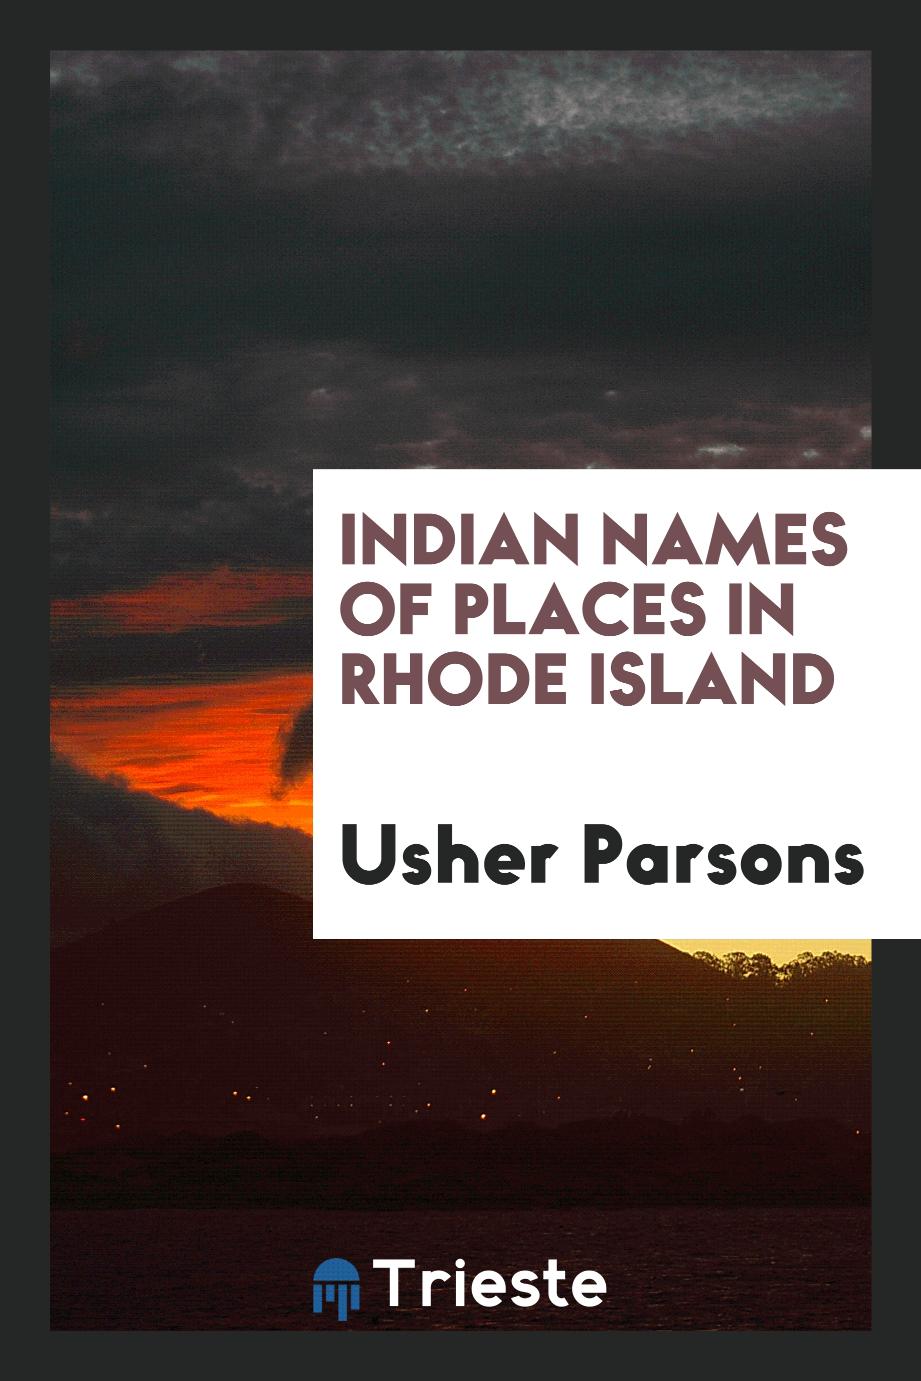 Indian names of places in Rhode Island